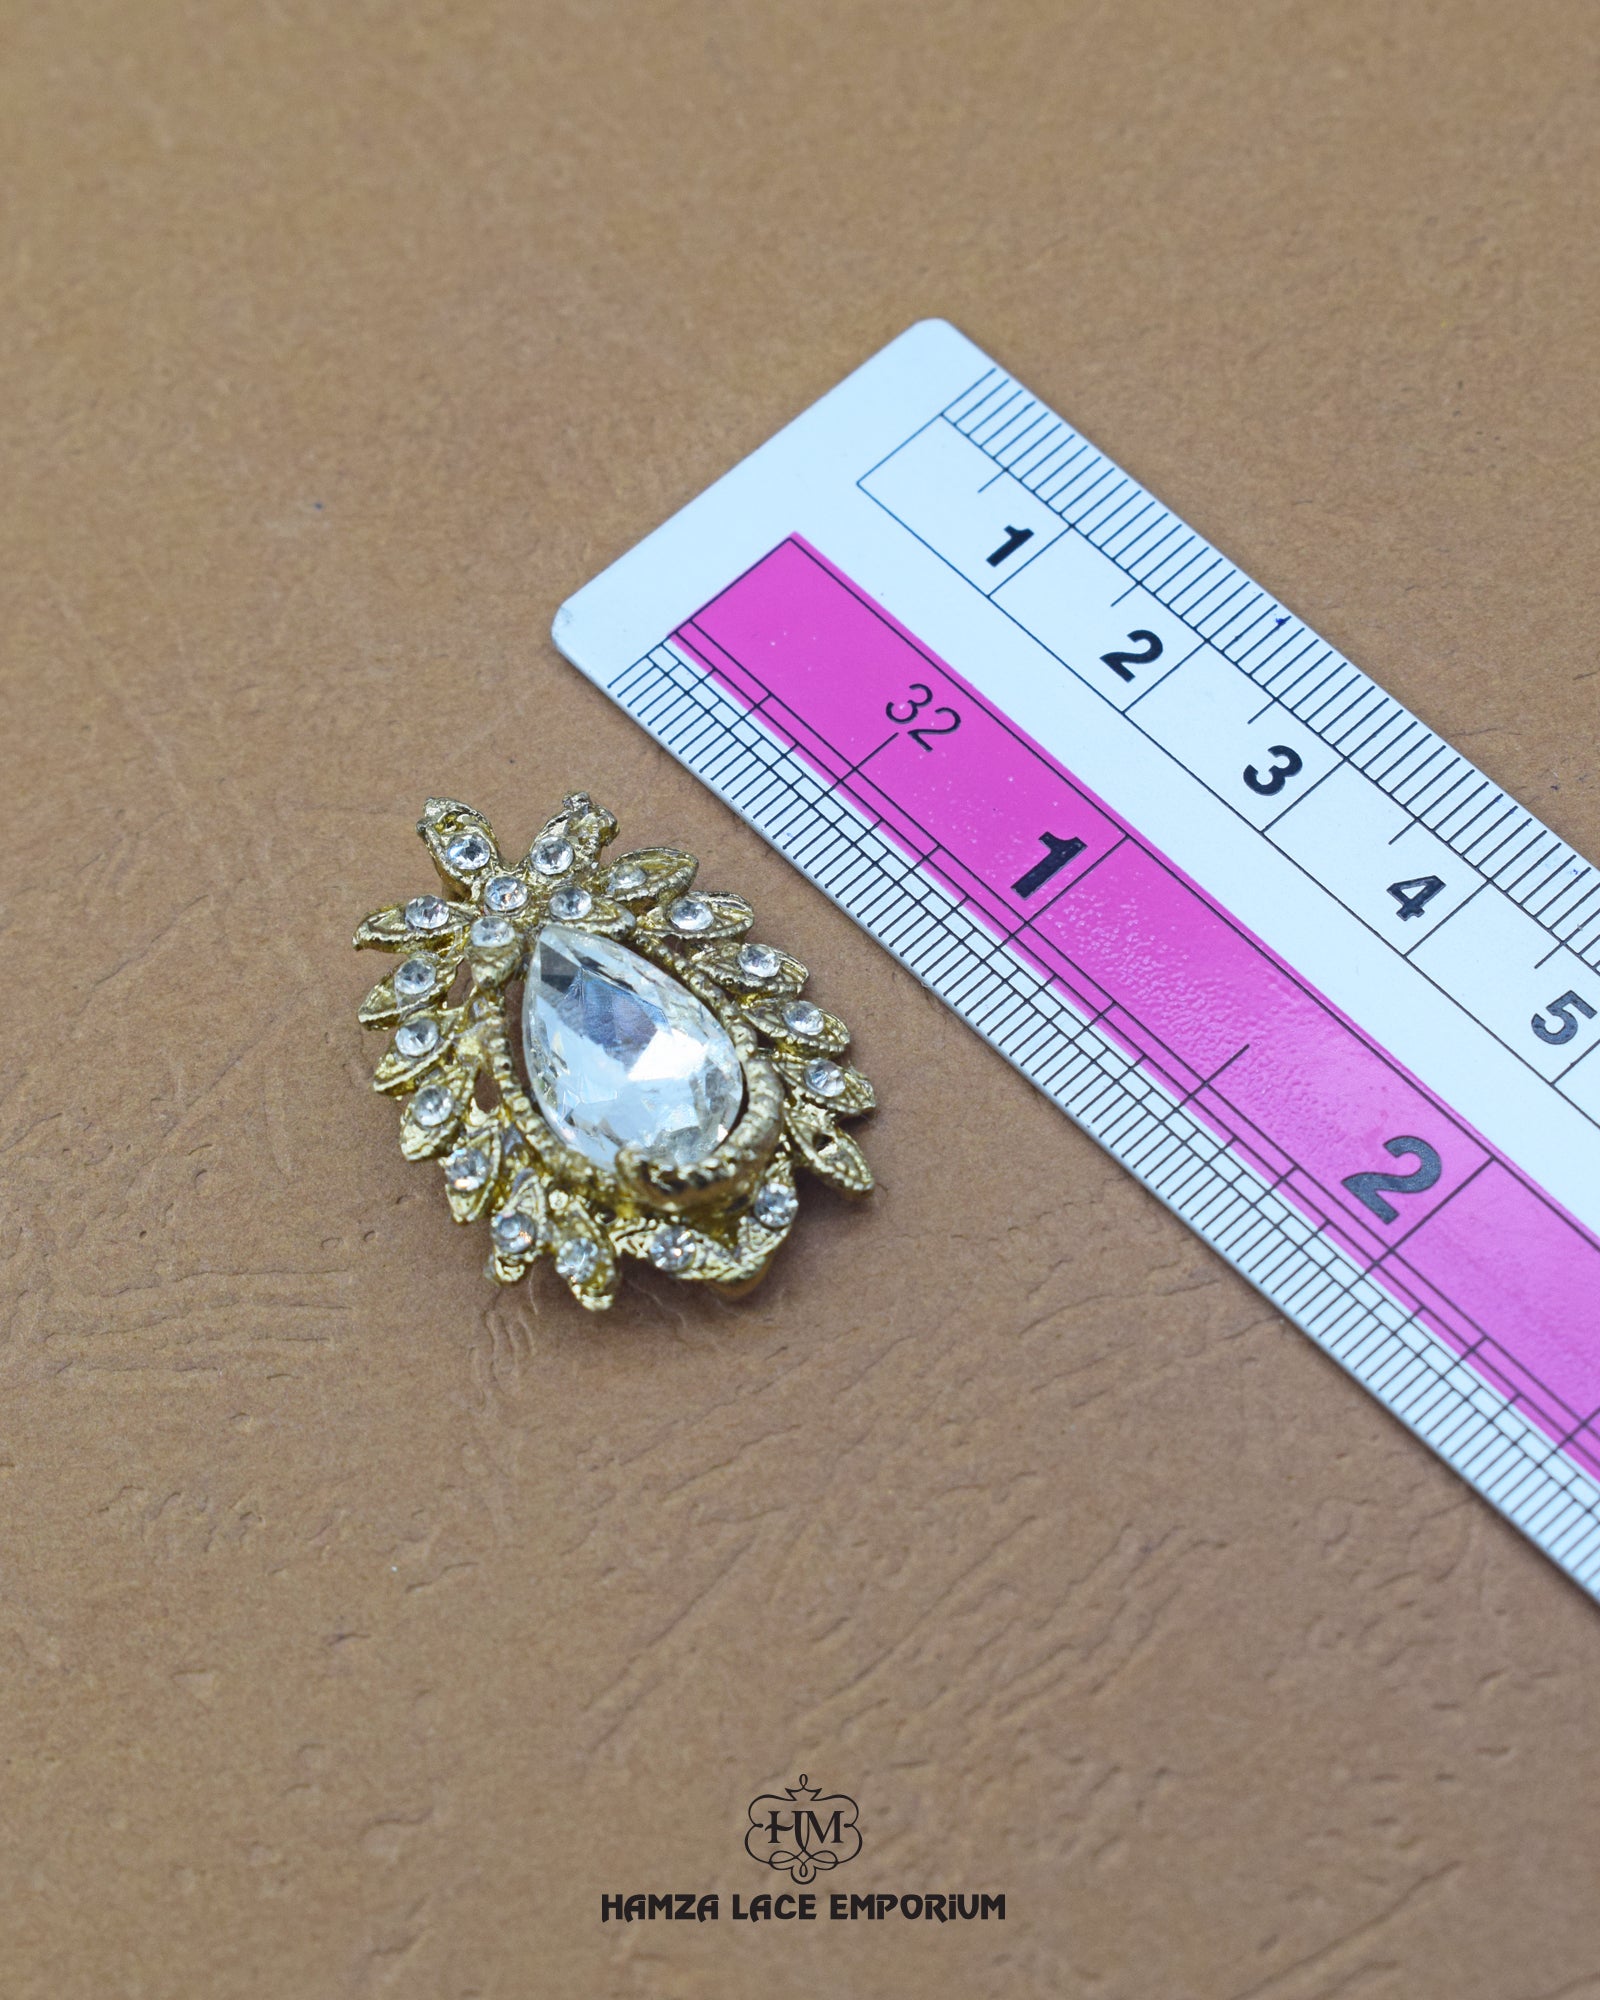 The size of the 'Kundan Stone Button MA585' is indicated using a ruler.